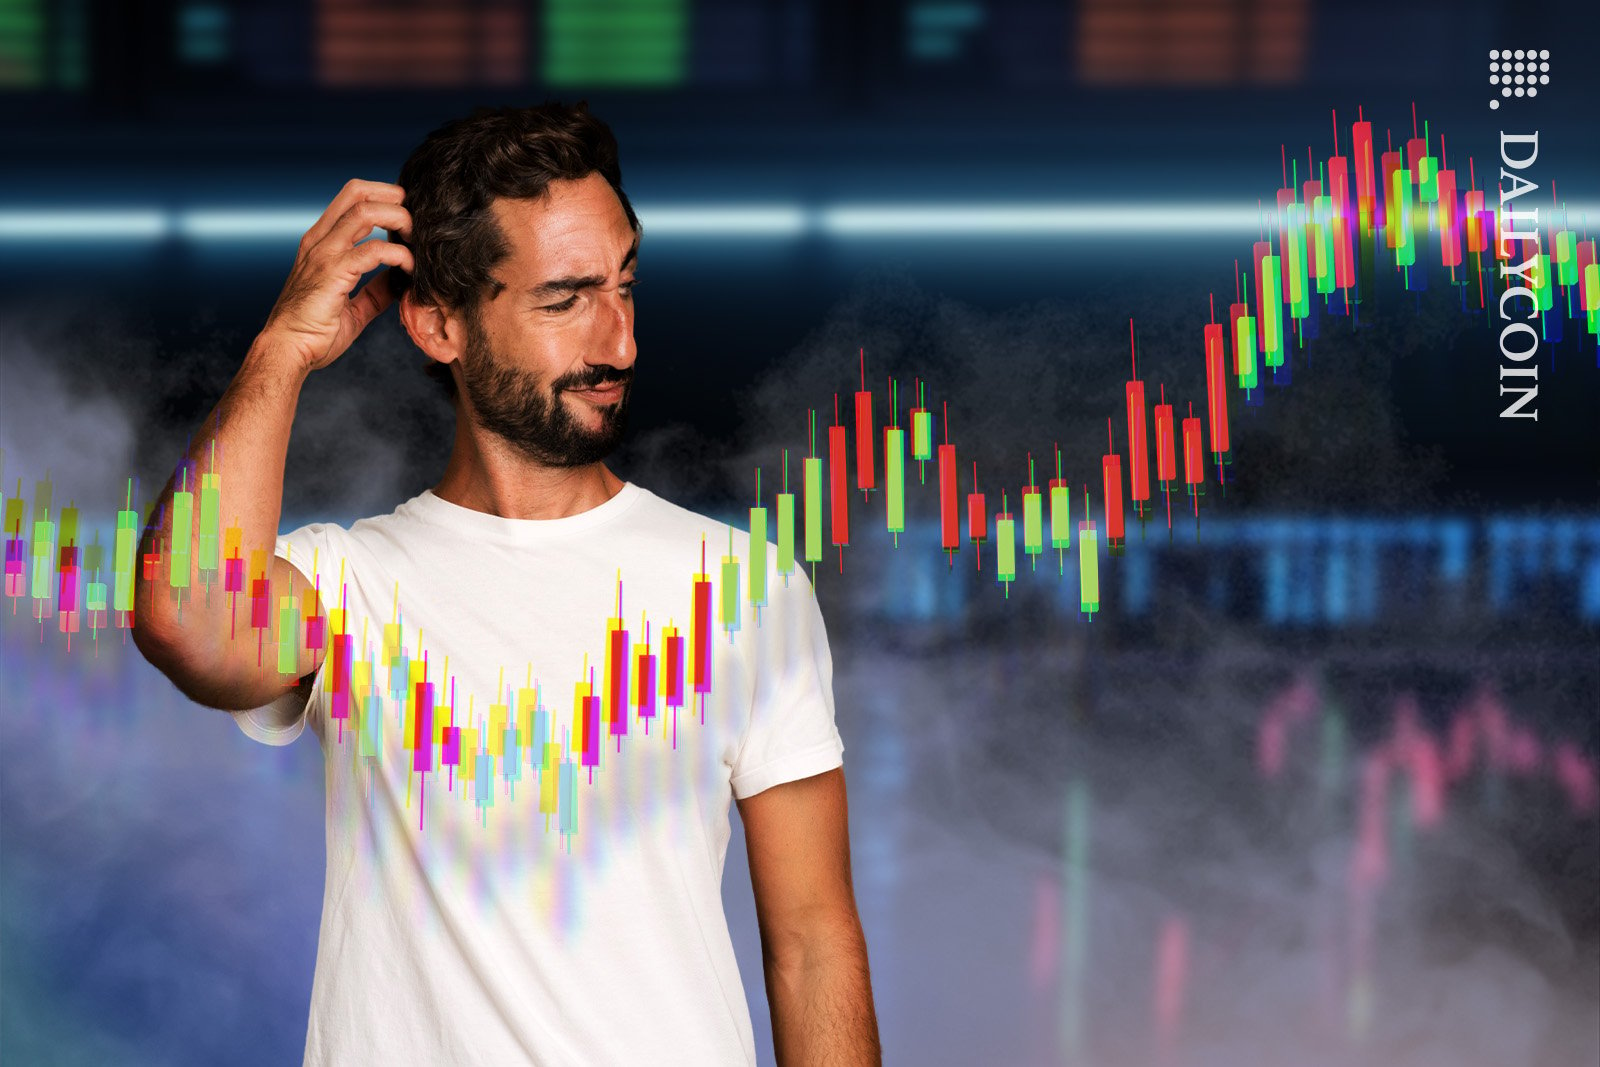 Man looking at a crypto candlestick chart all confused.